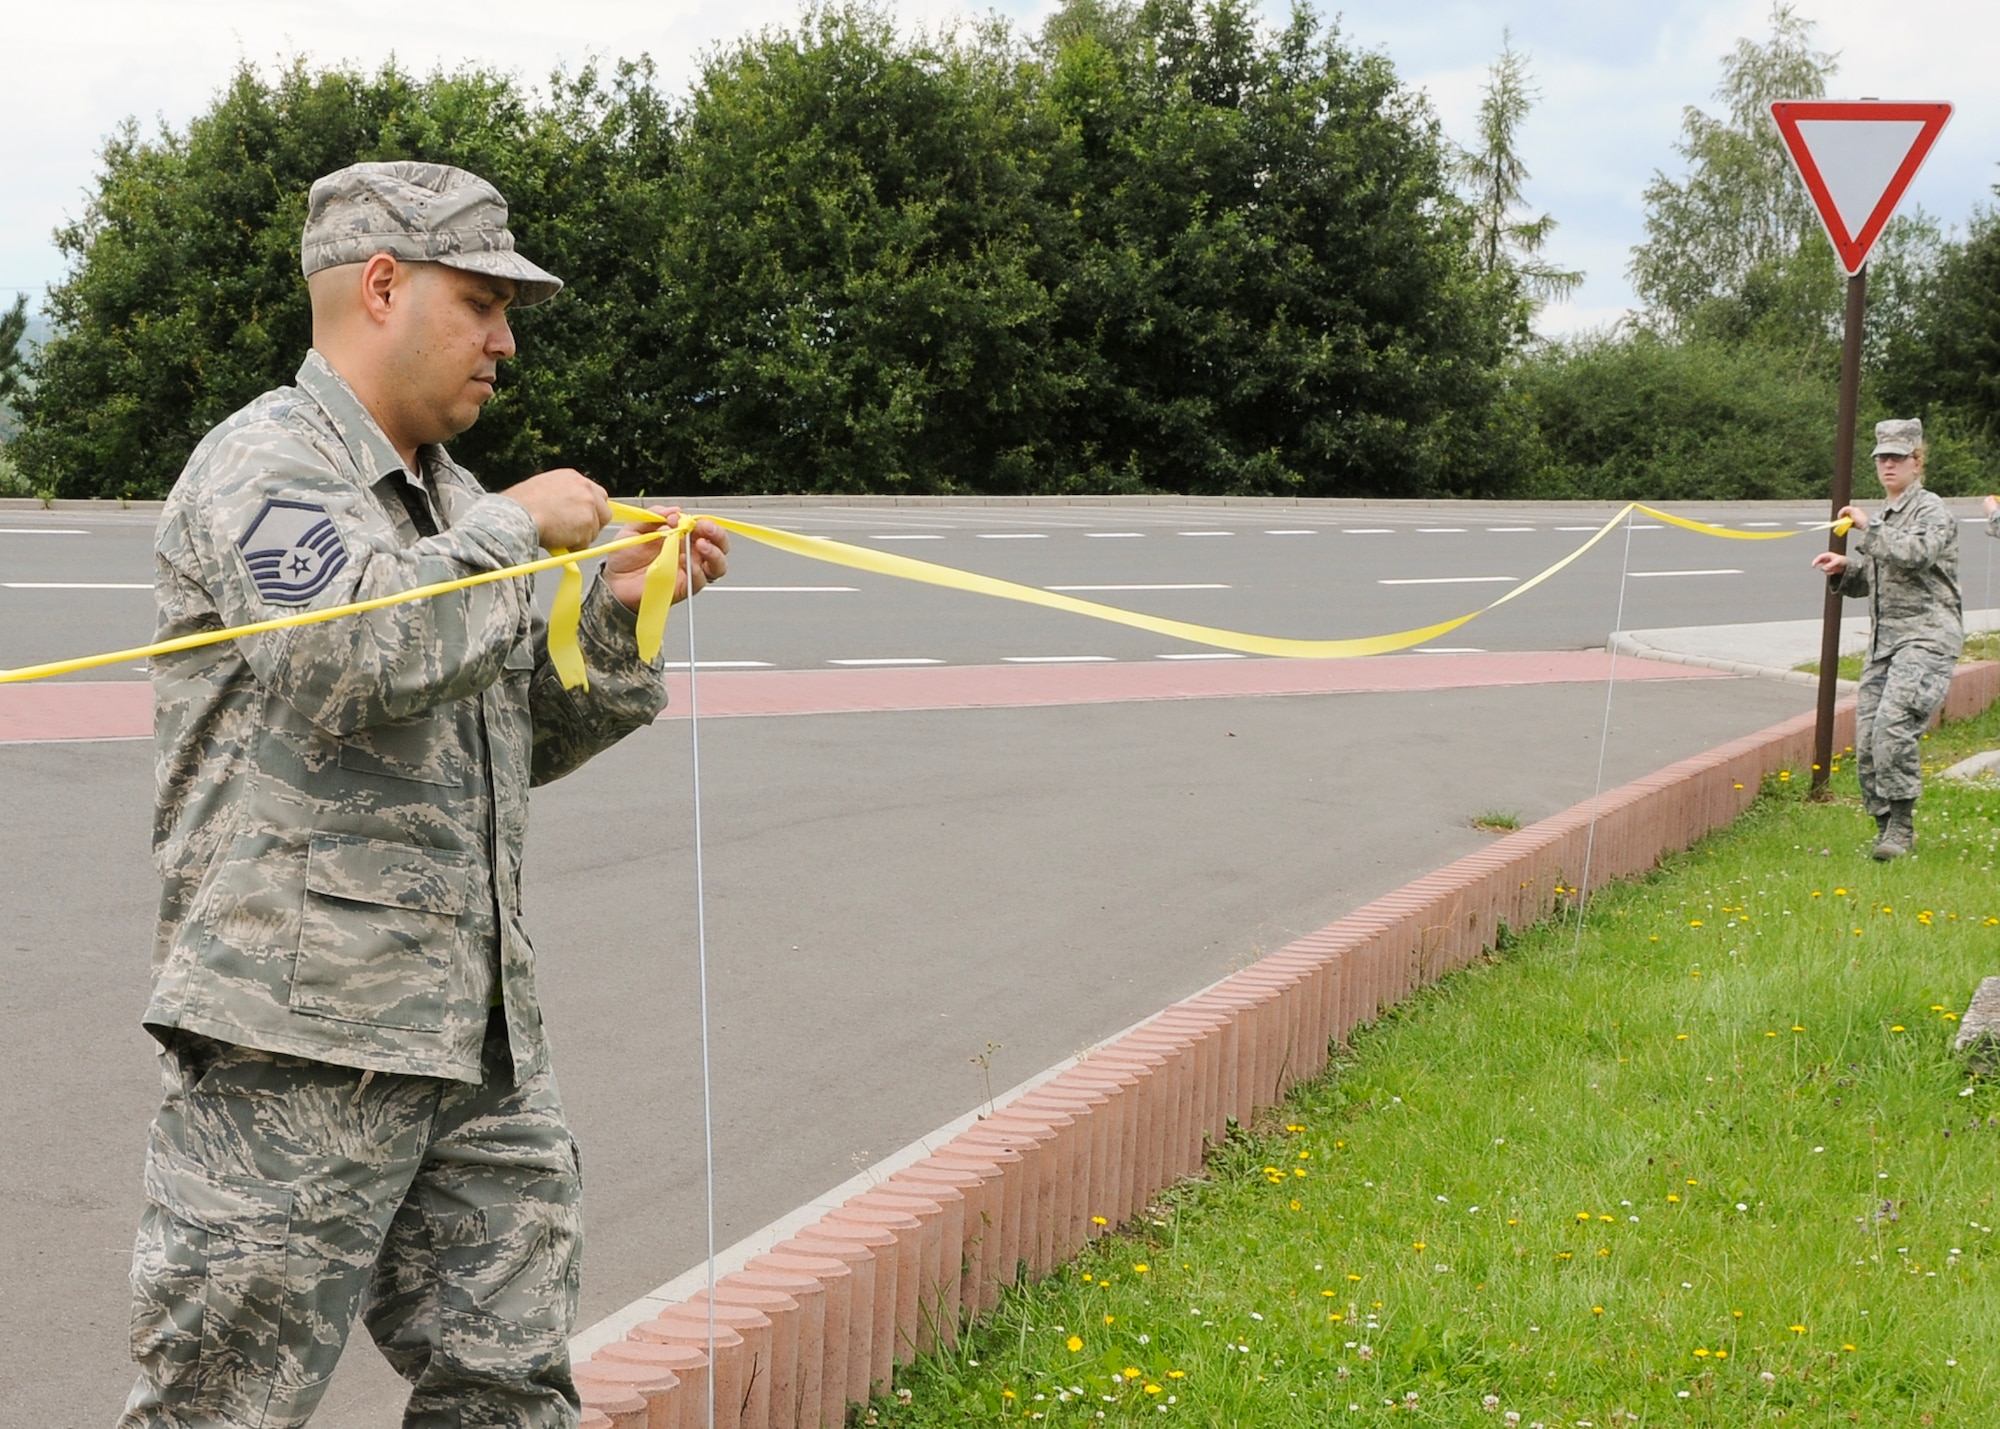 SPANGDAHLEM AIR BASE, Germany -- Master Sgt. Joseph Santiago, 52nd Fighter Wing Plans, Programs and Inspections; and Airman 1st Class Christina Peabody, 52nd Medical Operations Squadron, set the boundaries for the upcoming Phase II exercise Aug. 4-7. The exercise is meant to prepare the 52nd FW for the NATO Tactical Evaluation in 2010. (U.S. Air Force photo by Airman 1st Class Nathanael Callon)